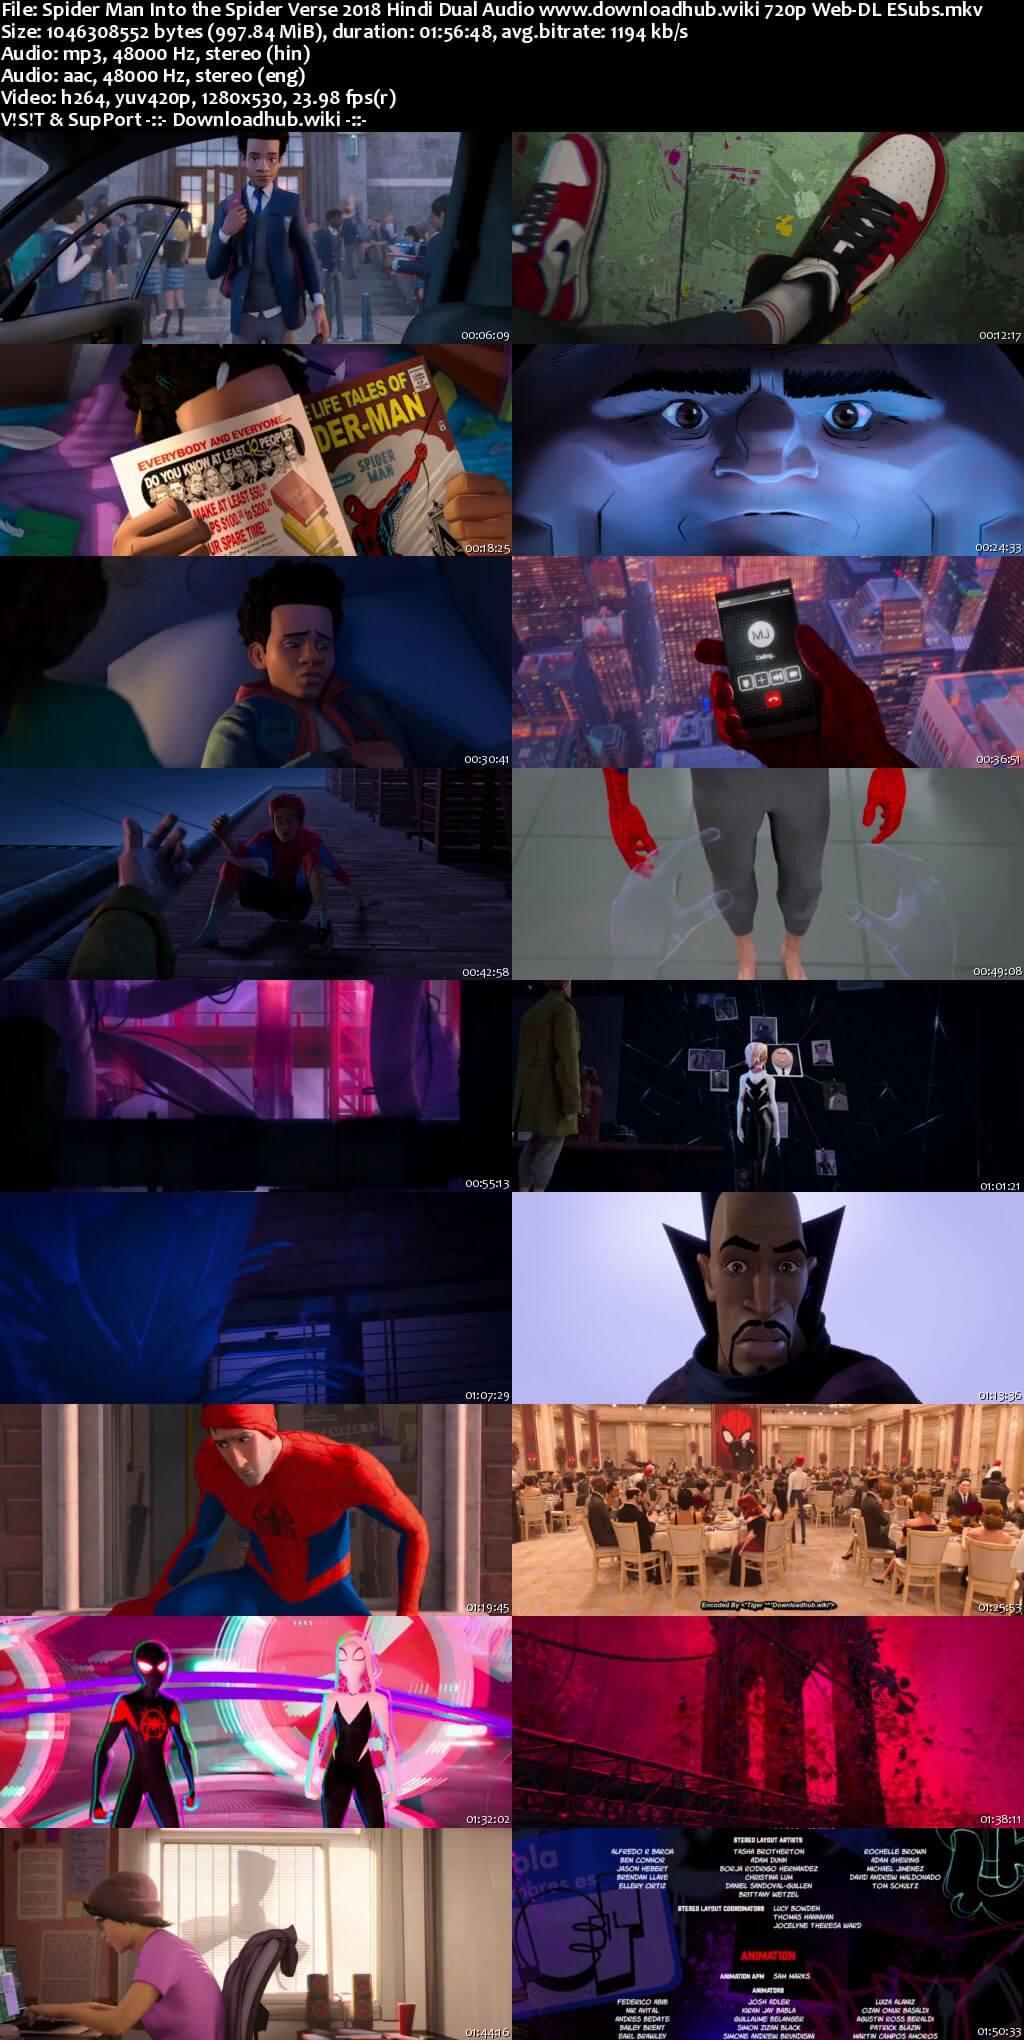 Spider Man Into the Spider Verse 2018 Hindi Dual Audio 720p Web-DL ESubs